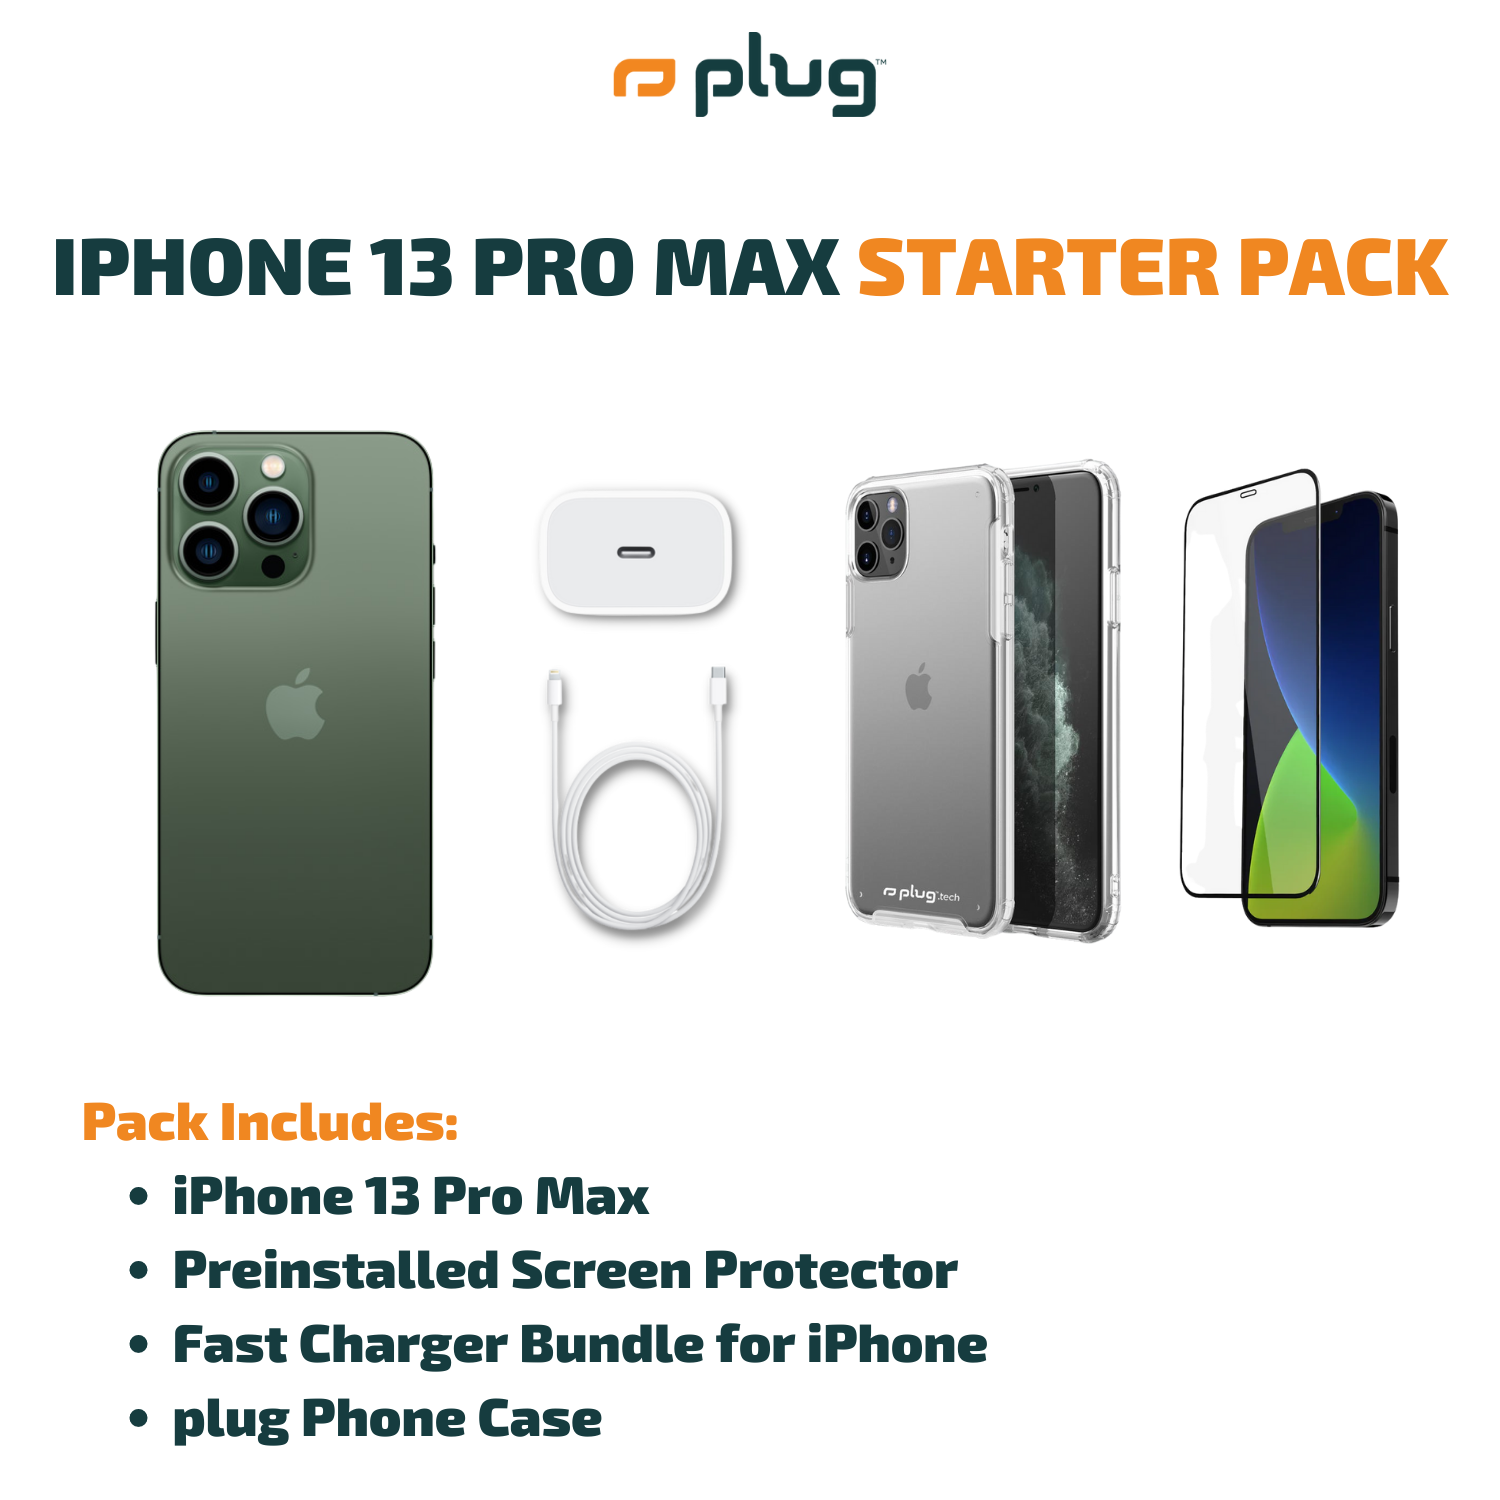 iPhone 13 Pro - Starter Pack